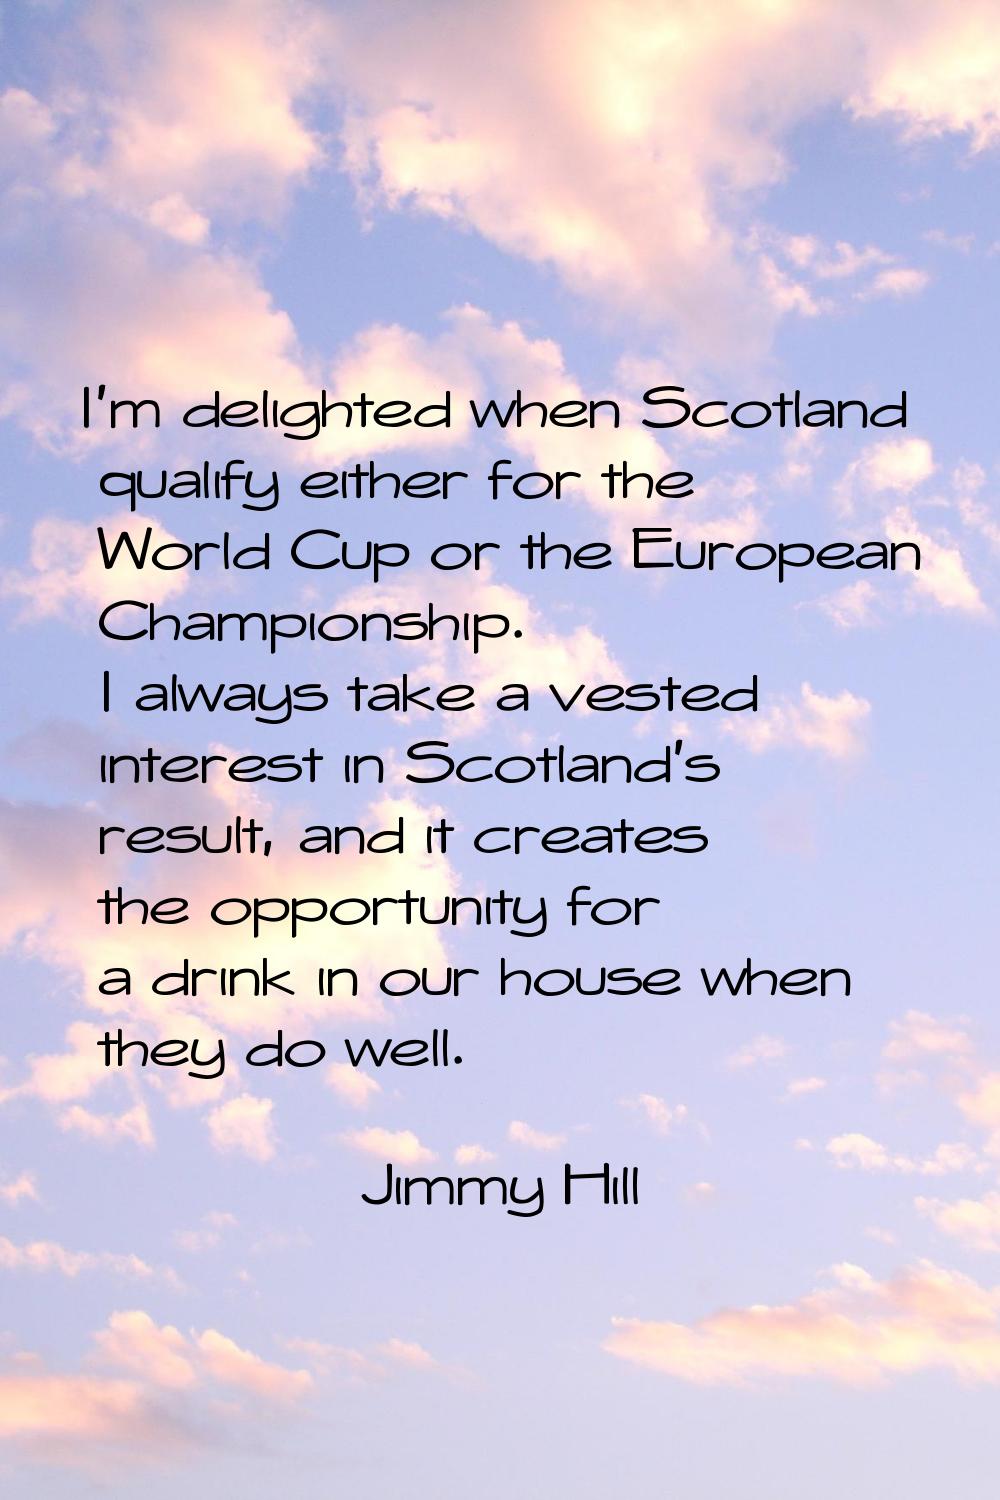 I'm delighted when Scotland qualify either for the World Cup or the European Championship. I always